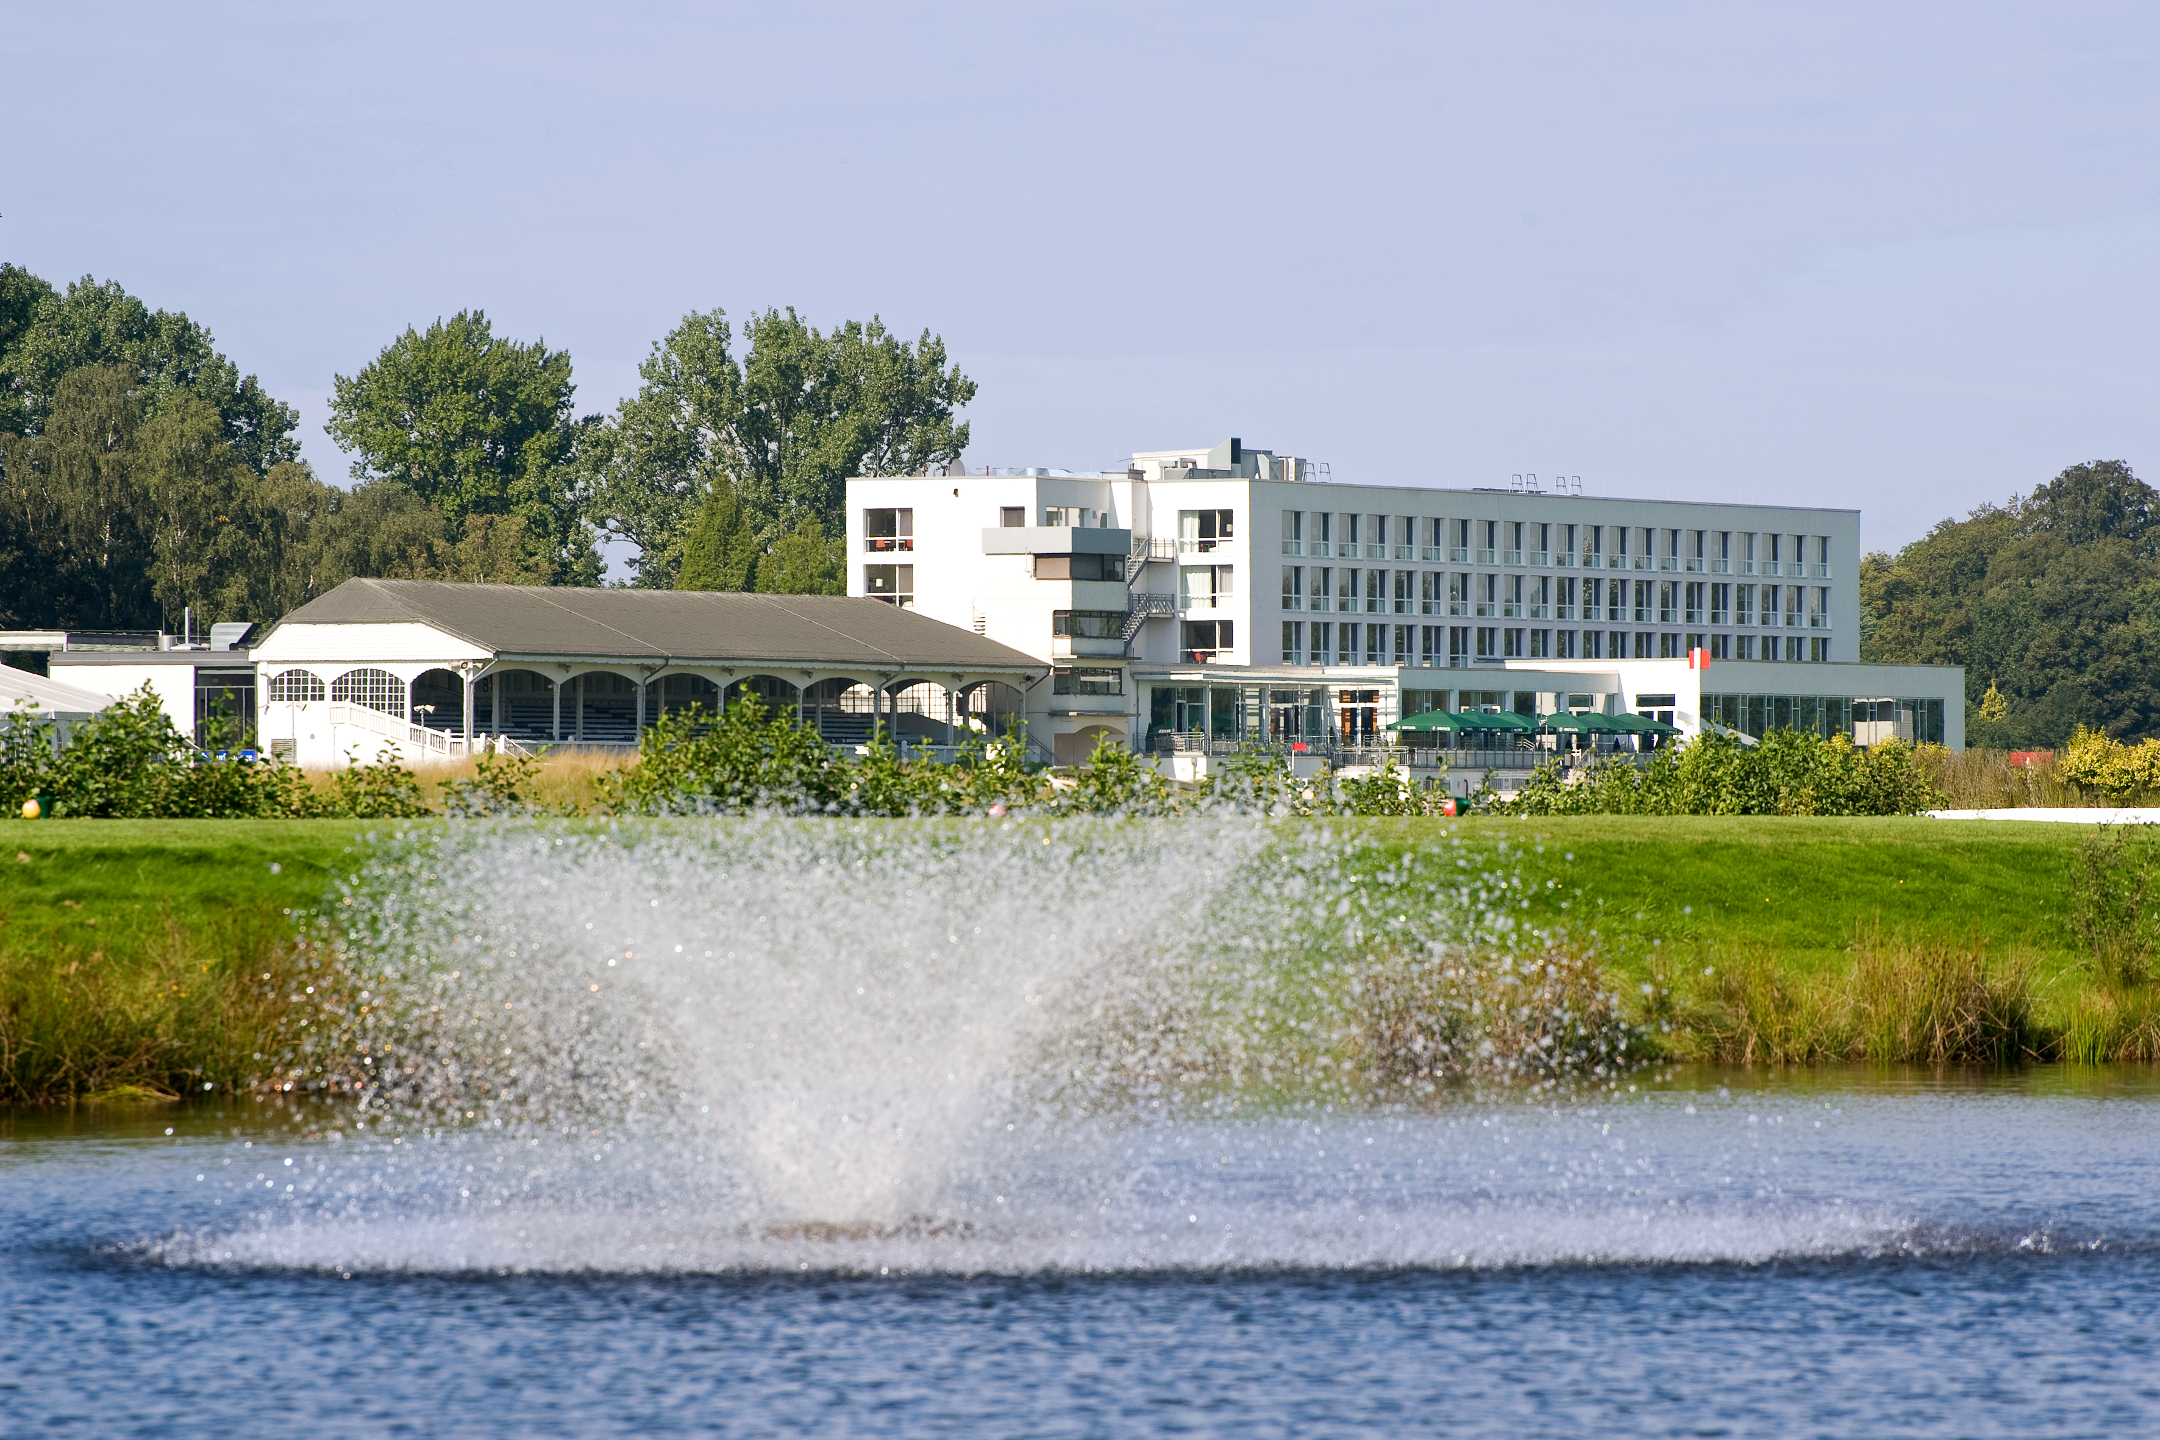 Exterior view of the ATLANTIC Hotel Galopprennbahn Bremen with its beautiful green parks